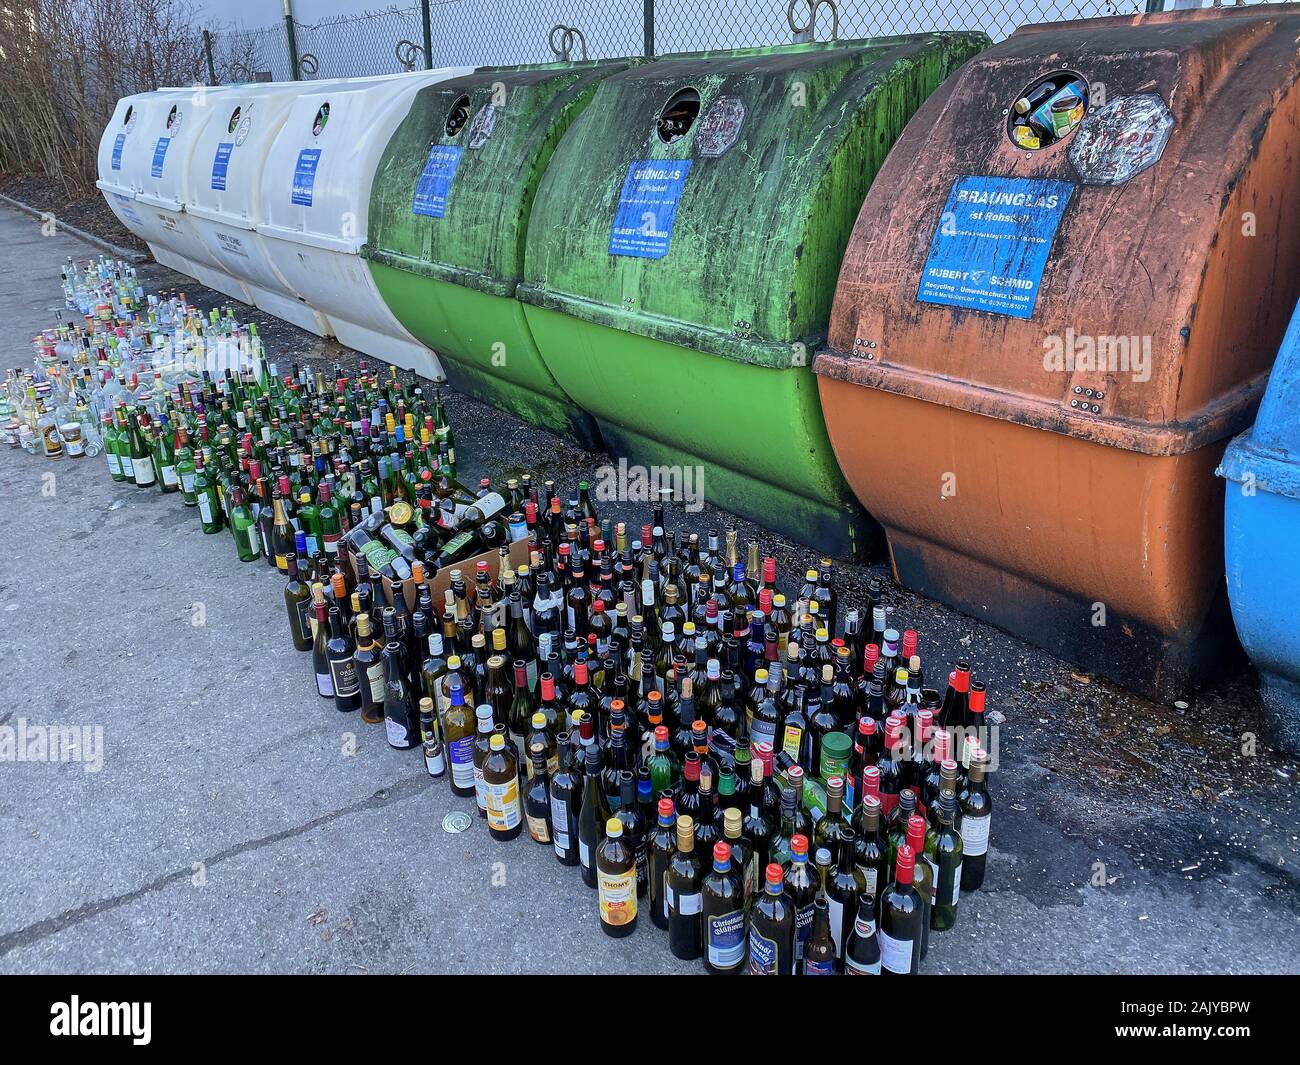 Glass recycling container in Marktoberdorf, Bavaria, Germany, December 30, 2019.  © Peter Schatz / Alamy Stock Photos Stock Photo